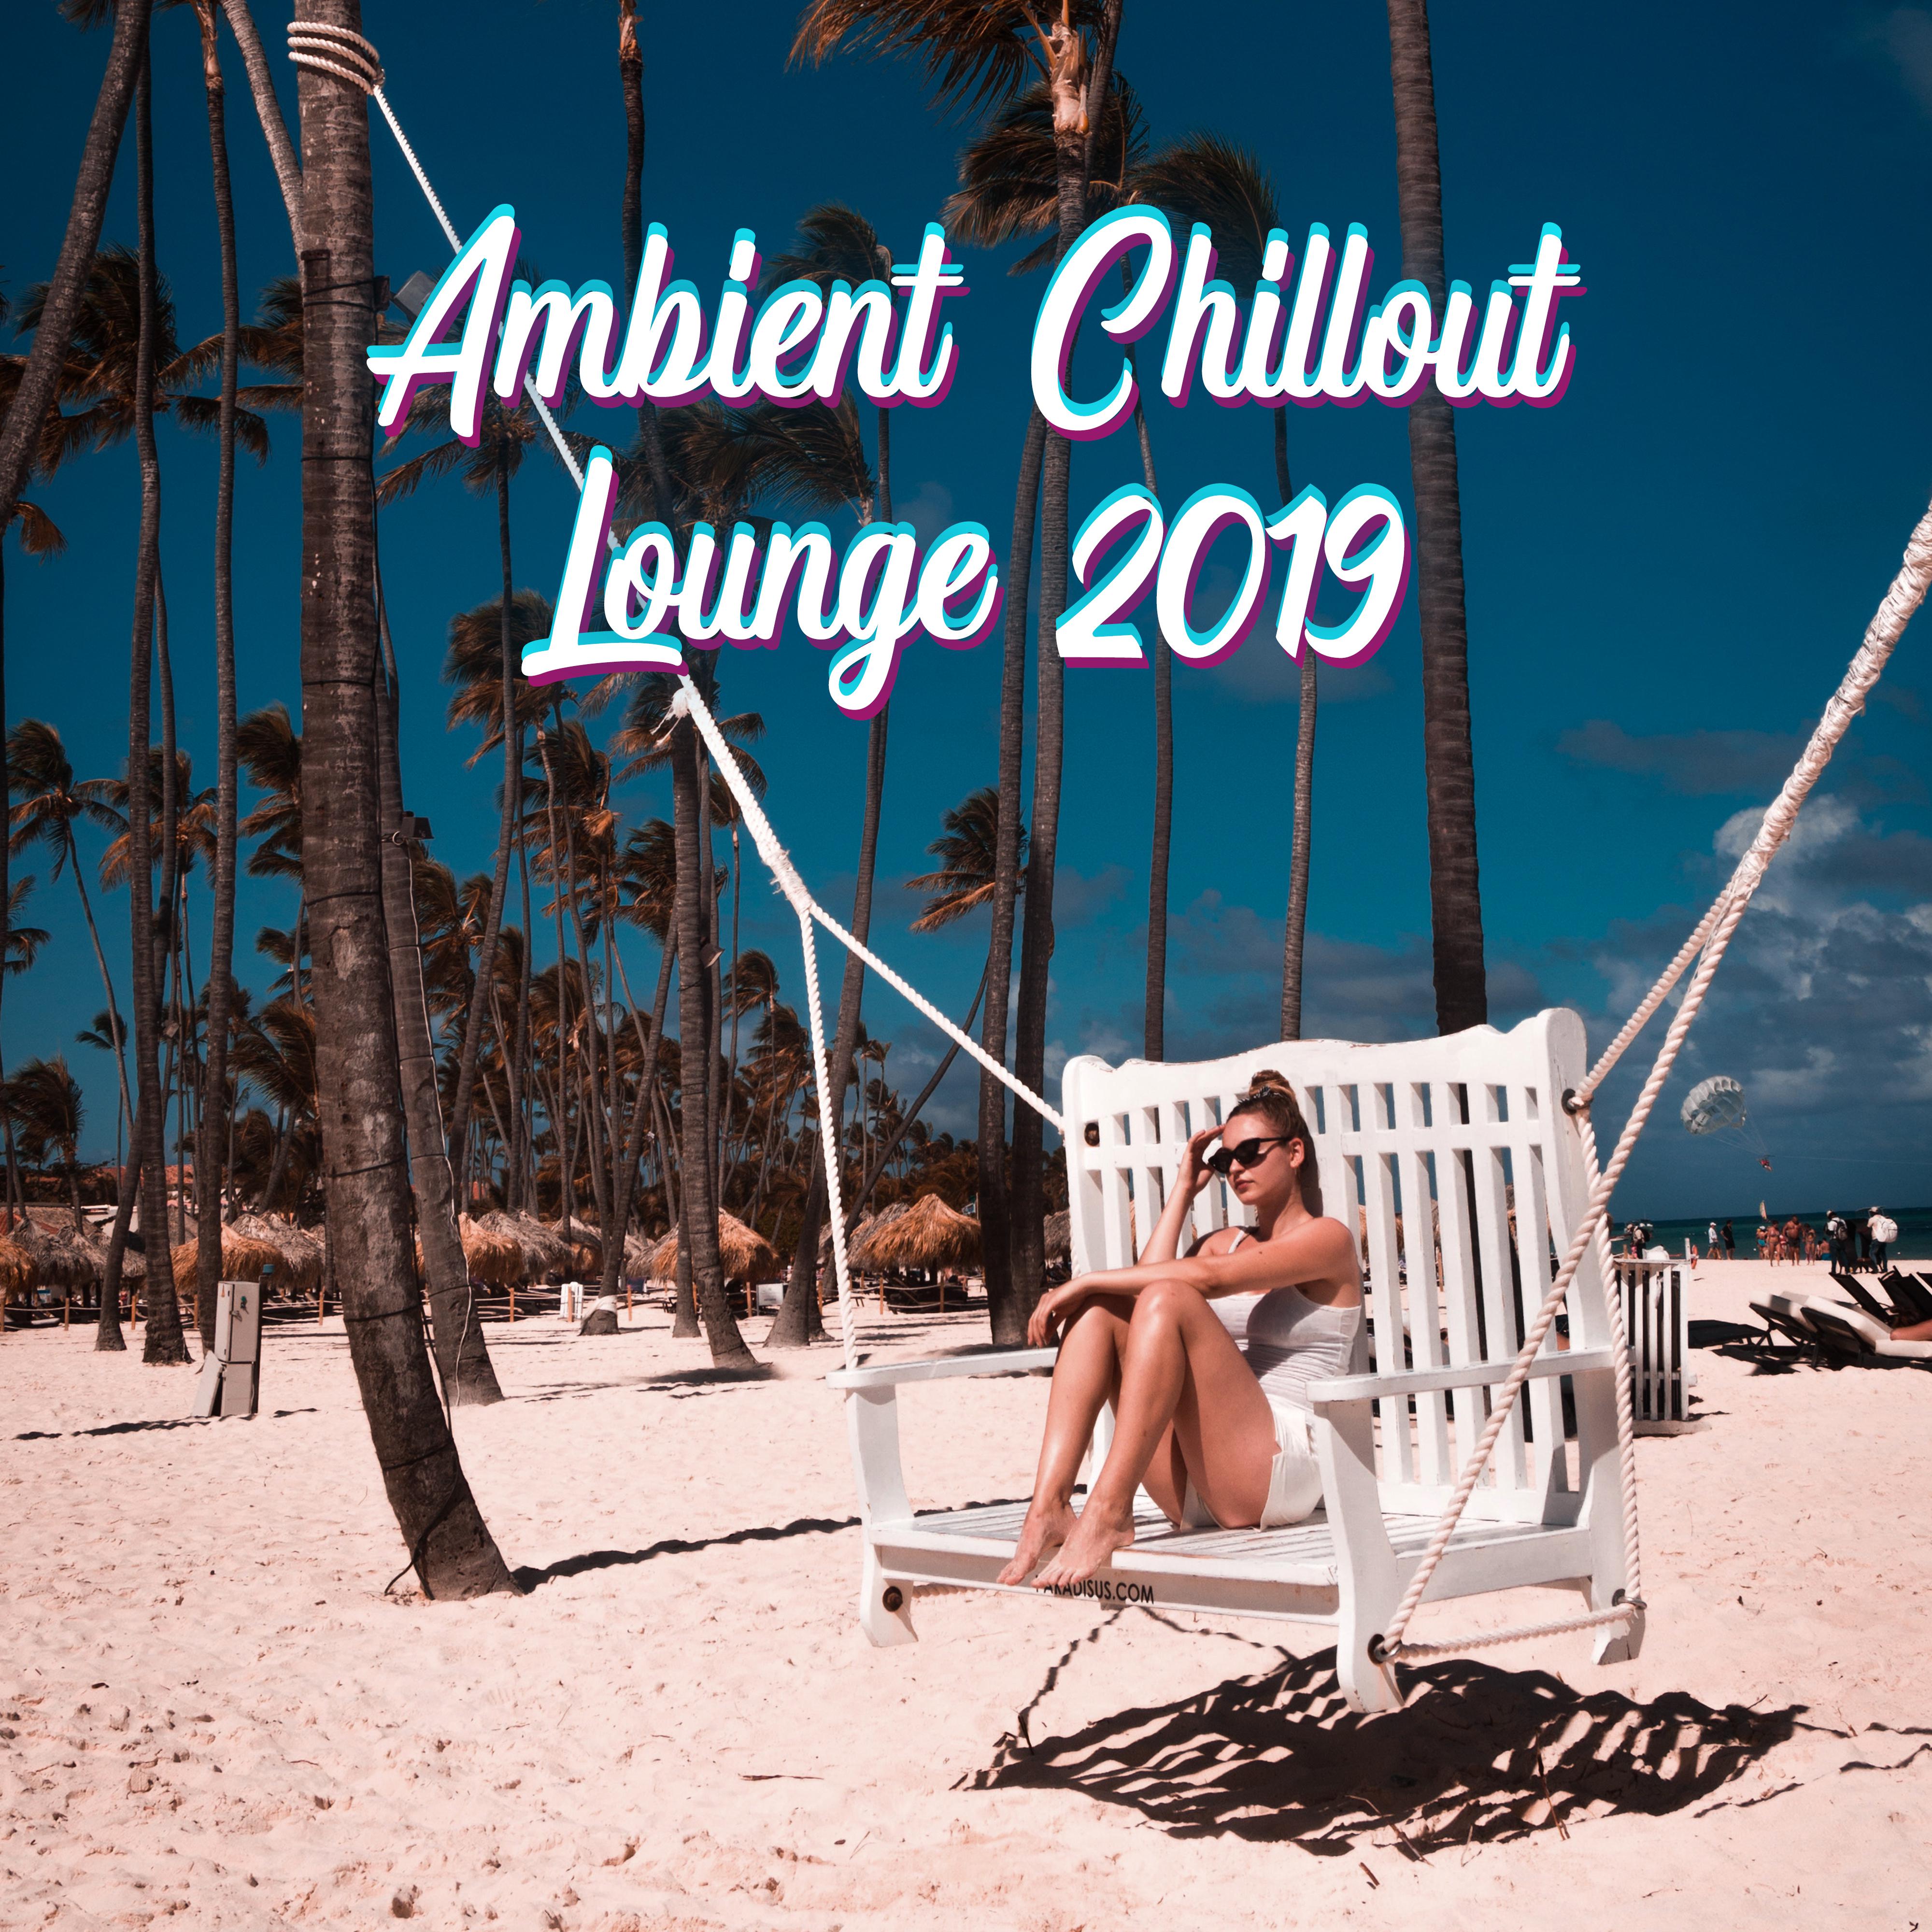 Ambient Chillout Lounge 2019: High Quality Ambient Music Created to Relax, Rest, Stress Relief, Calm Down and Chill Out